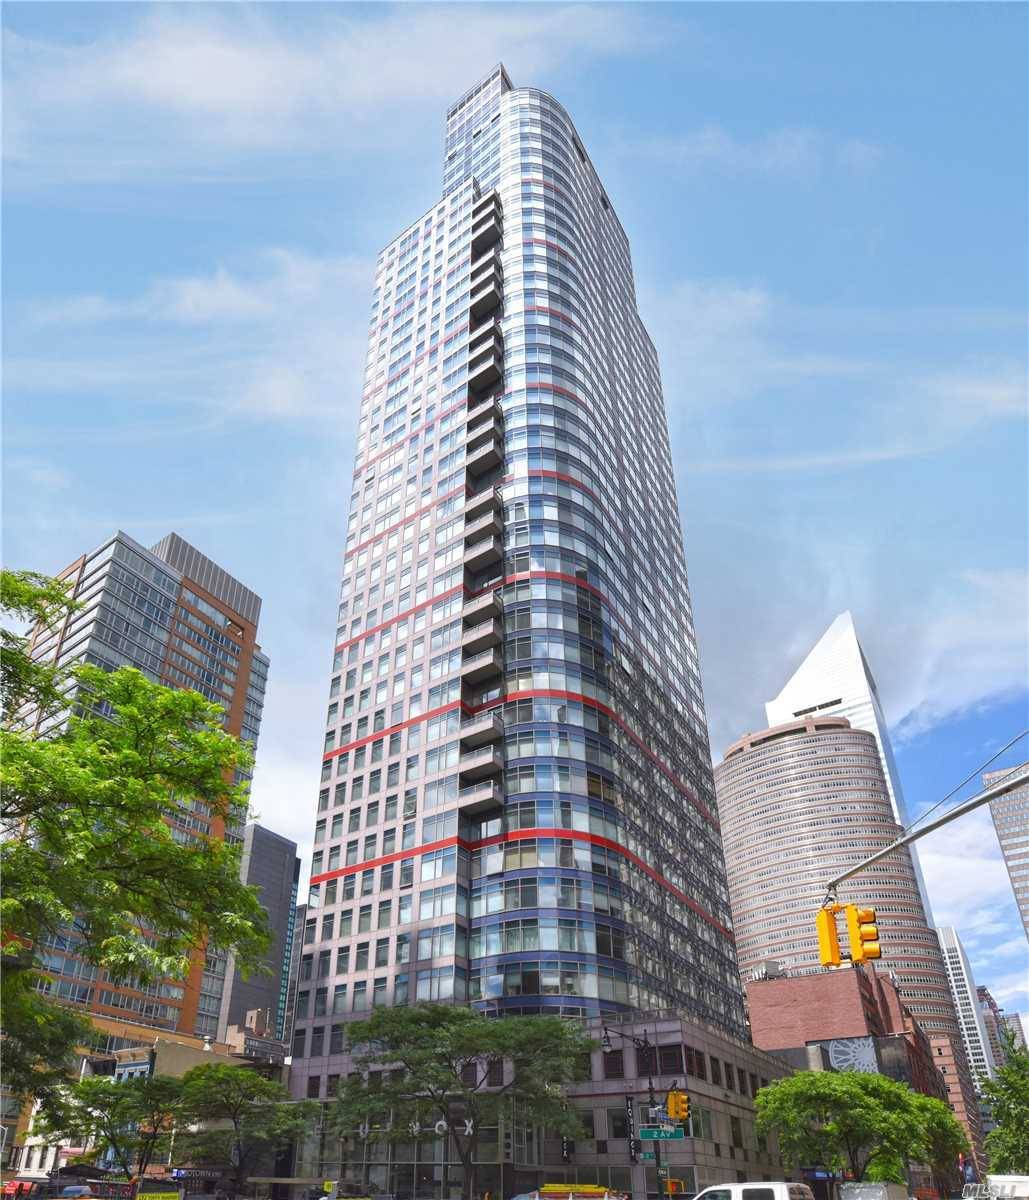 The Mondrian Is A Stylish High Rise Building Conveniently Located In Manhattan.